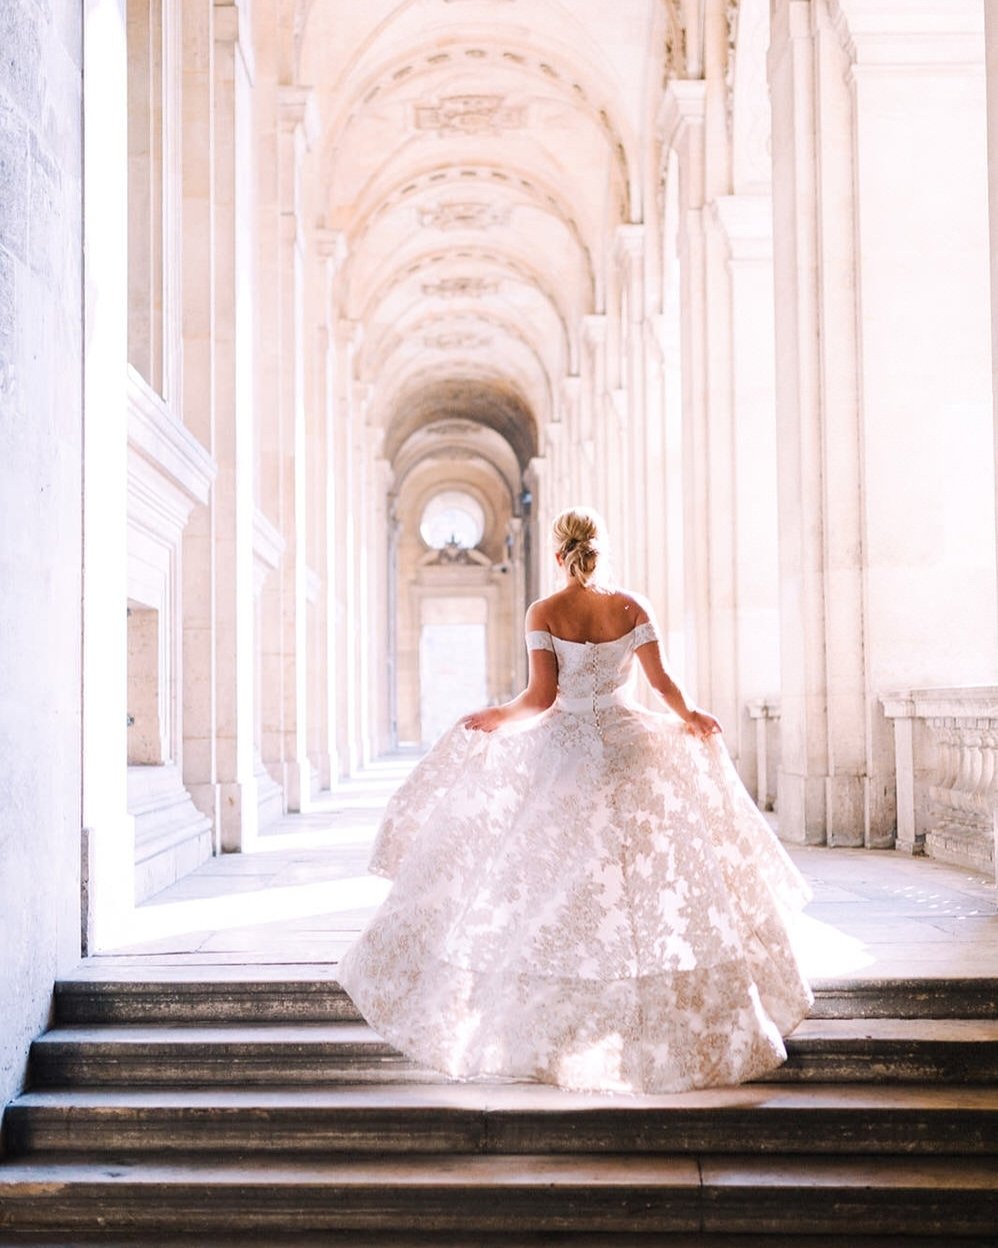 Swooning over this stunning gown, with the intricate patters shimmering gracefully in Parisian sunlight! 😍

Pair your detailed bridal gown with a minimalist updo, or polished, brushed-out waves for a classic look that will appear timeless years down